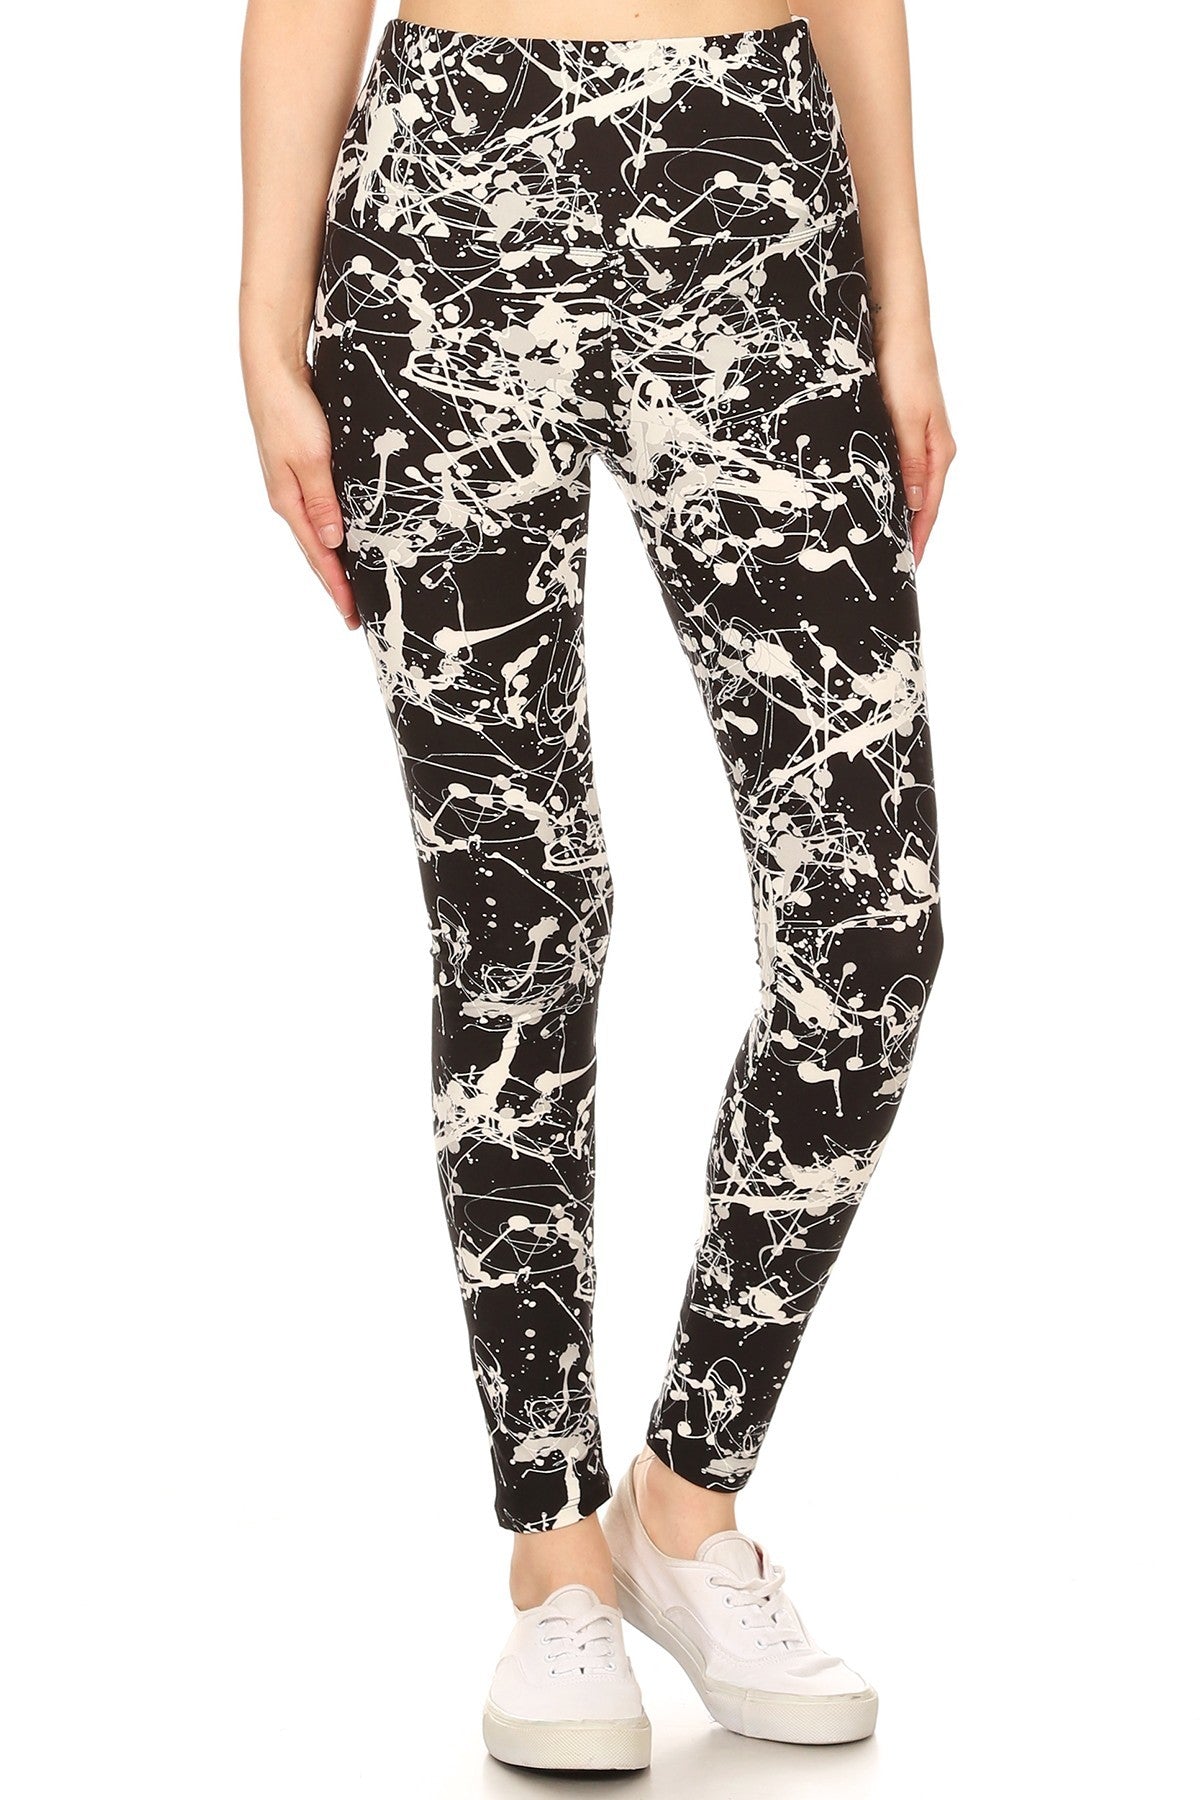 Long Yoga Style Banded Lined Paint Splatters Printed Knit Legging With High Waist